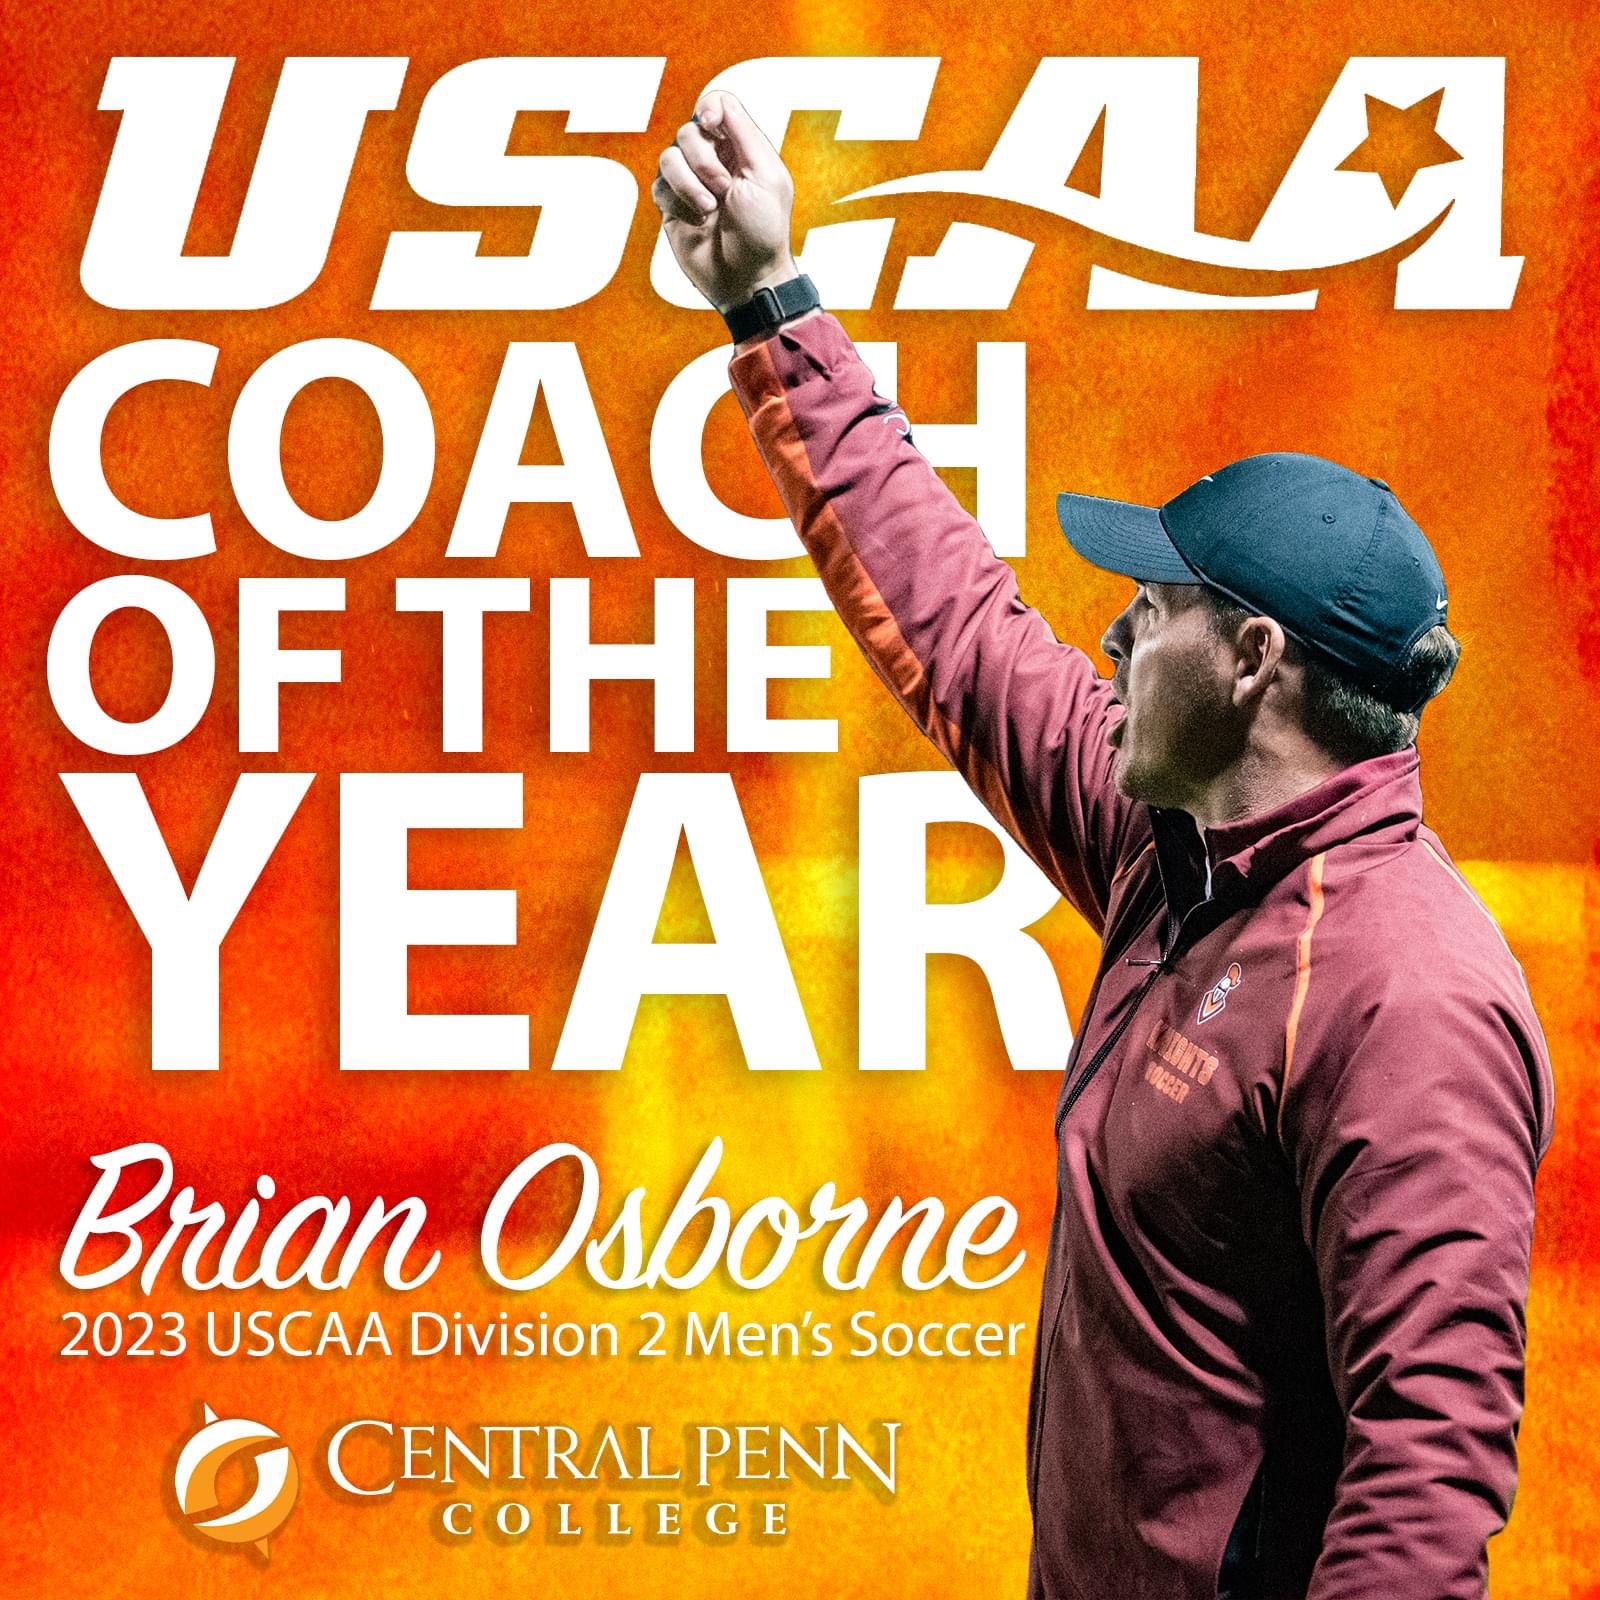 Central Penn College’s Brian Osborne Named “Coach of the Year”